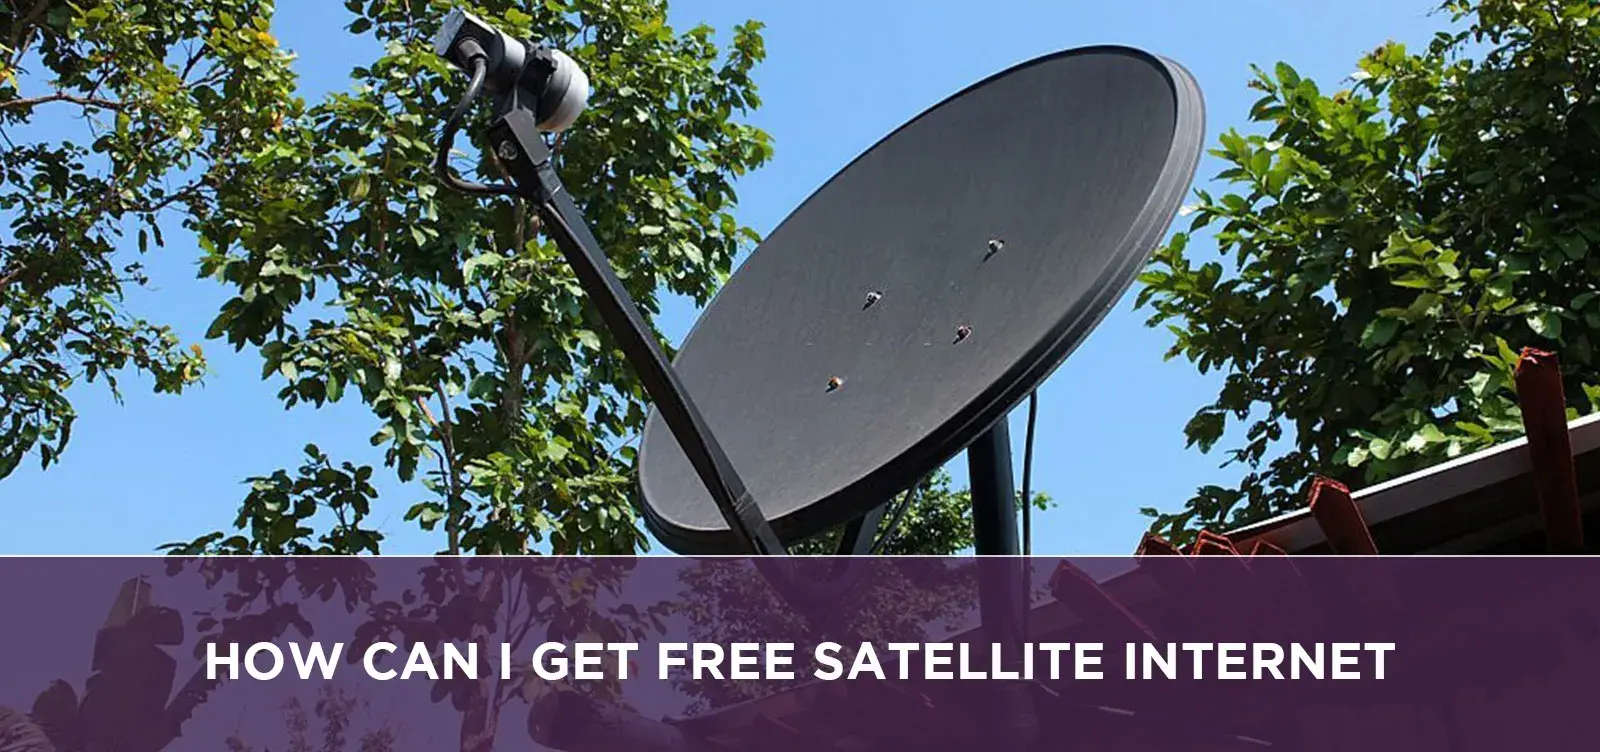 How Can I Get Free Satellite Internet?